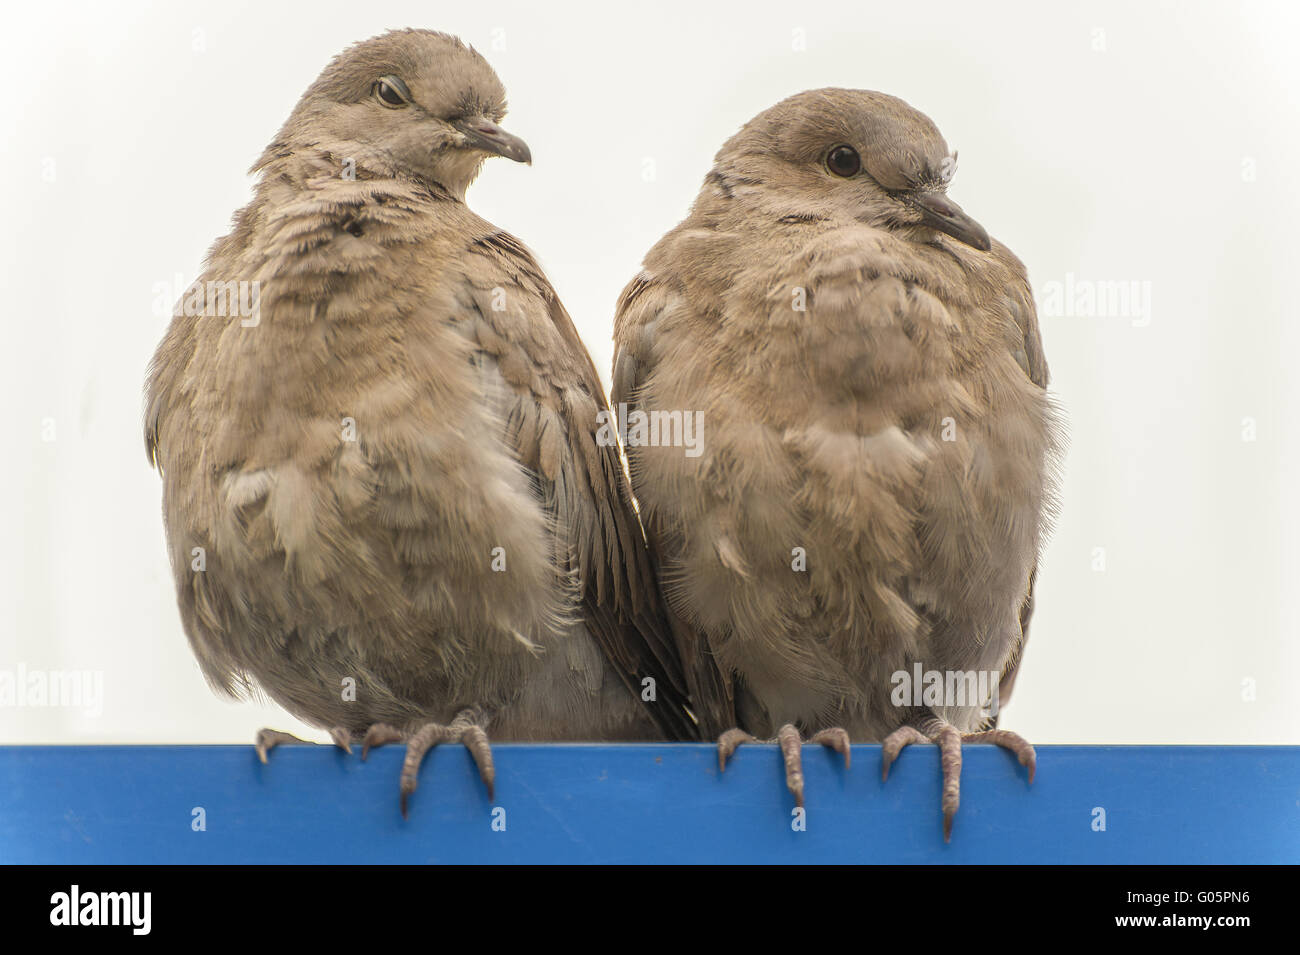 2 pigeons sitting side by side on a blue bar Stock Photo